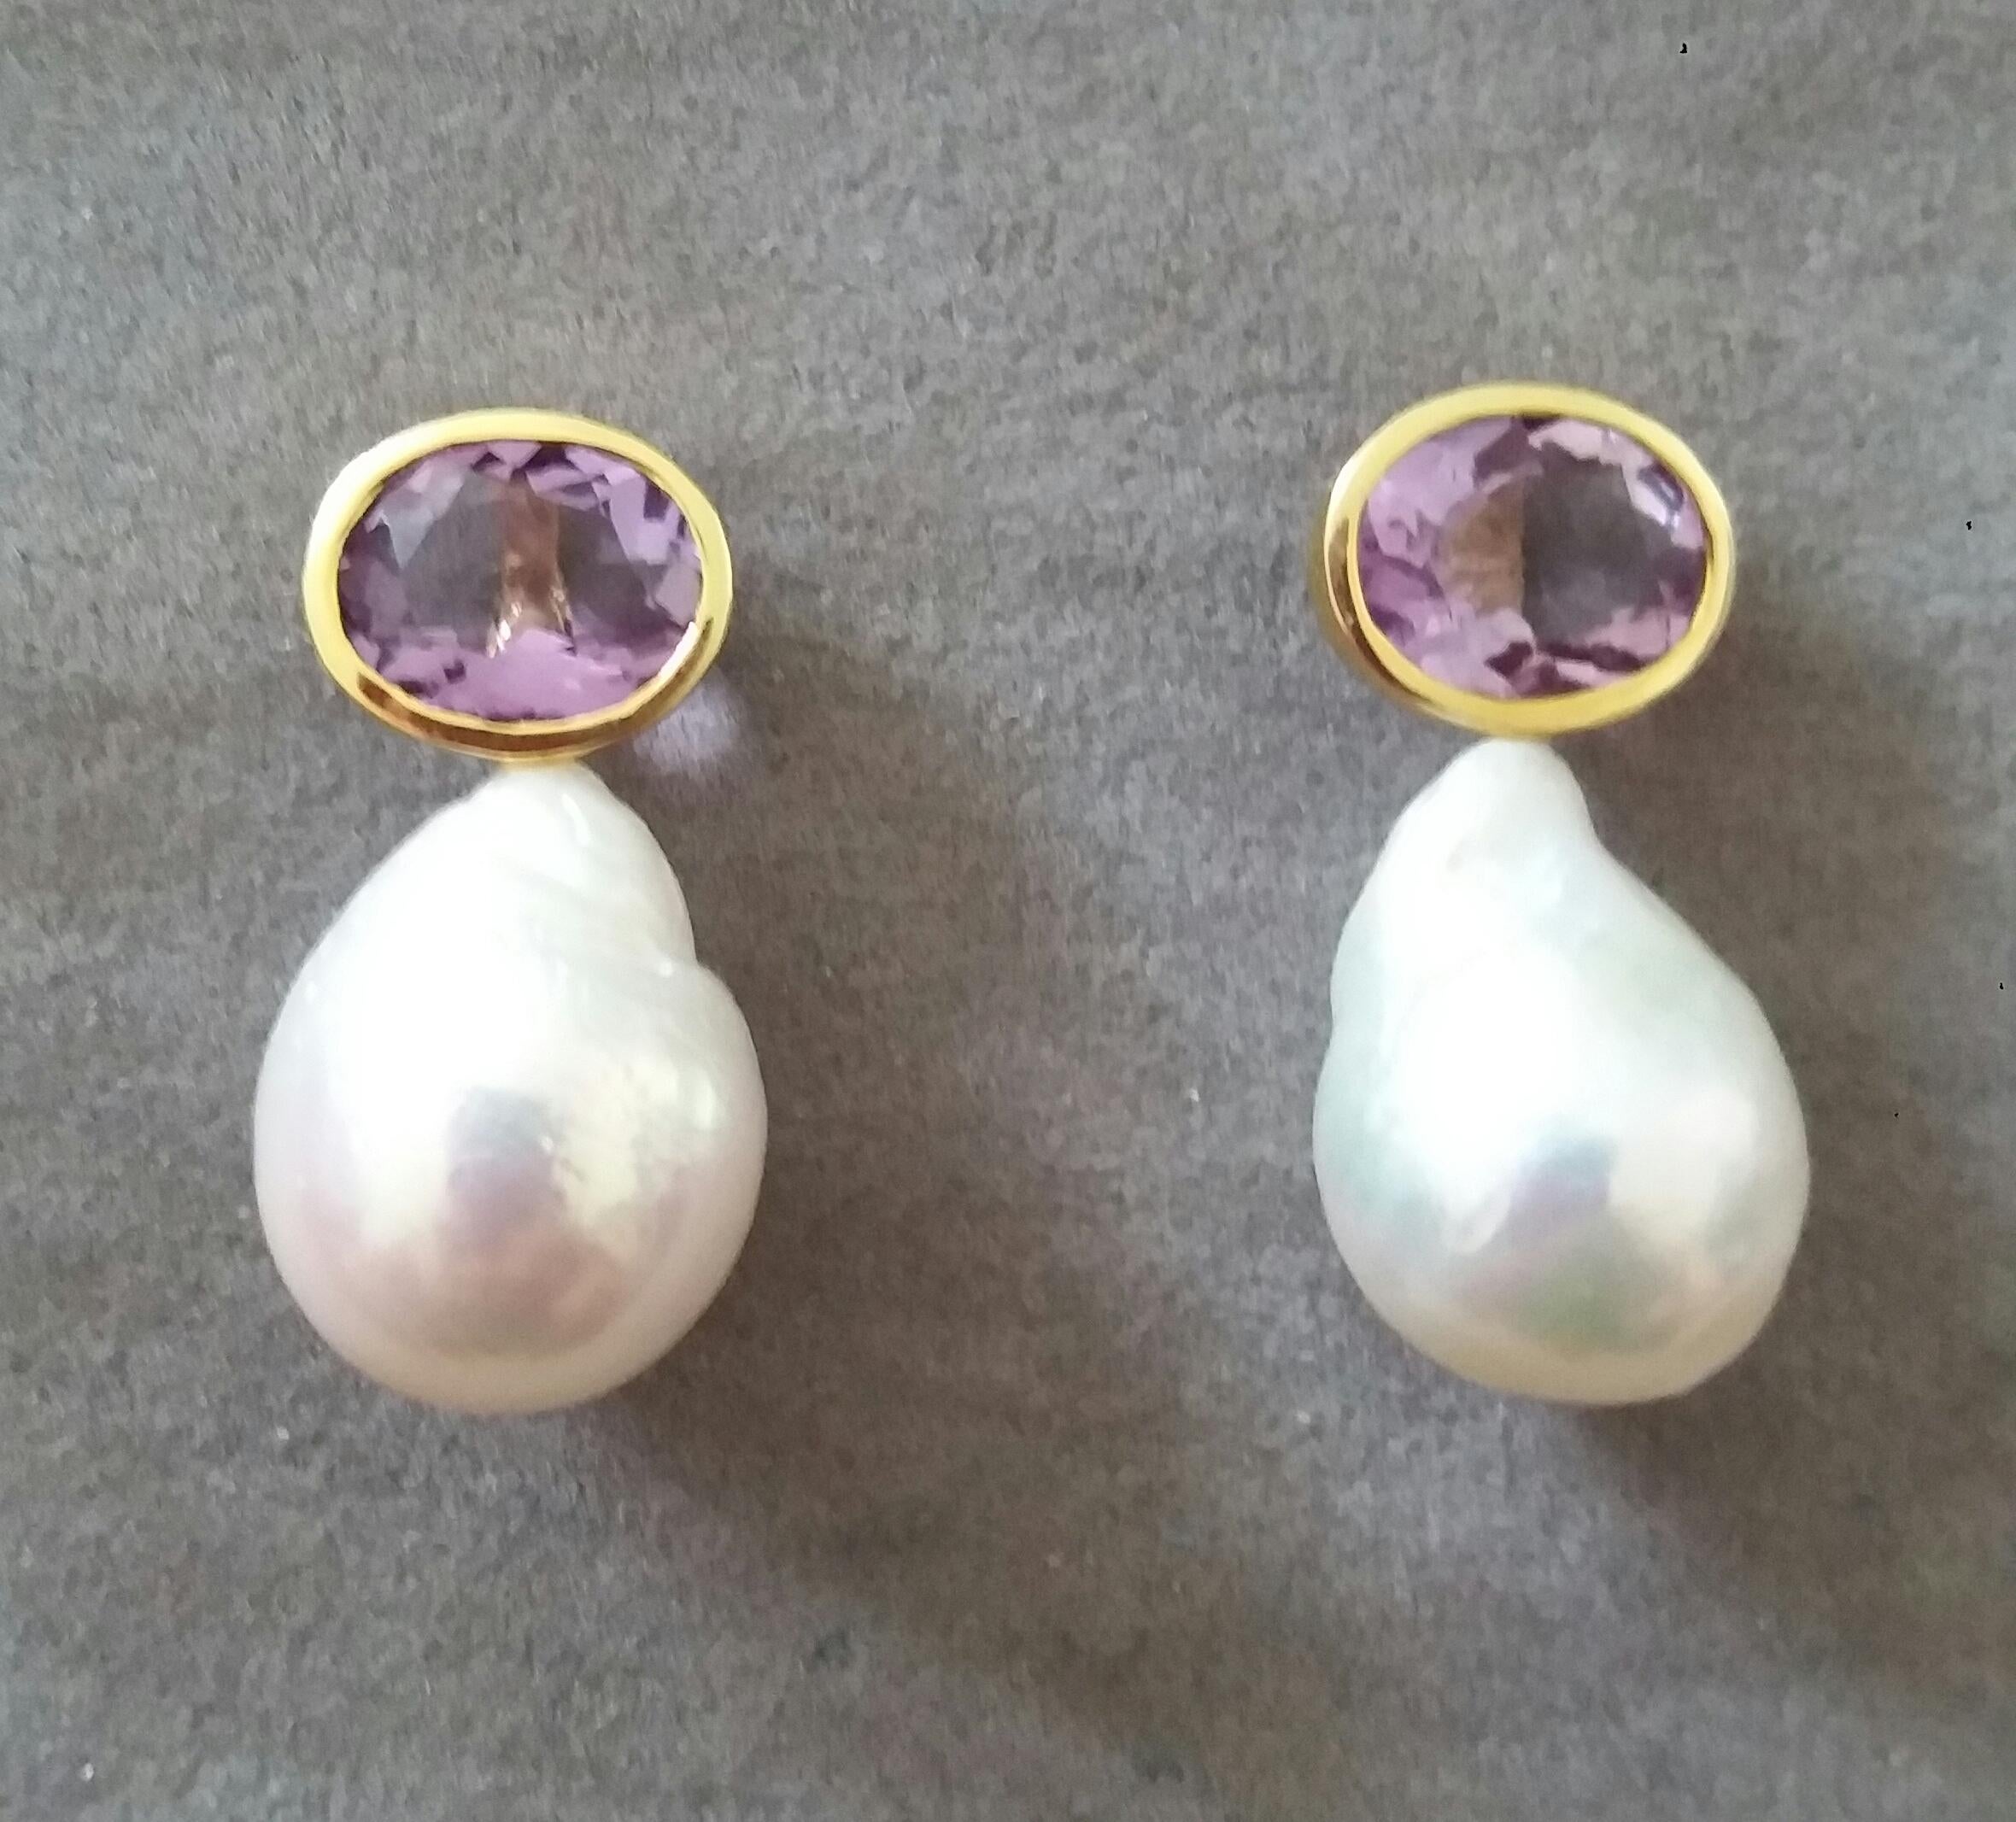 These simple but elegant earrings have 2 faceted Oval Shape Natural Amethysts size 8x10 mm set in yellow gold bezel at the top to which are suspended 2 Pear Shape White Baroque Pearls measuring 13mmx17mm and weighing 36 carats

In 1978 our workshop